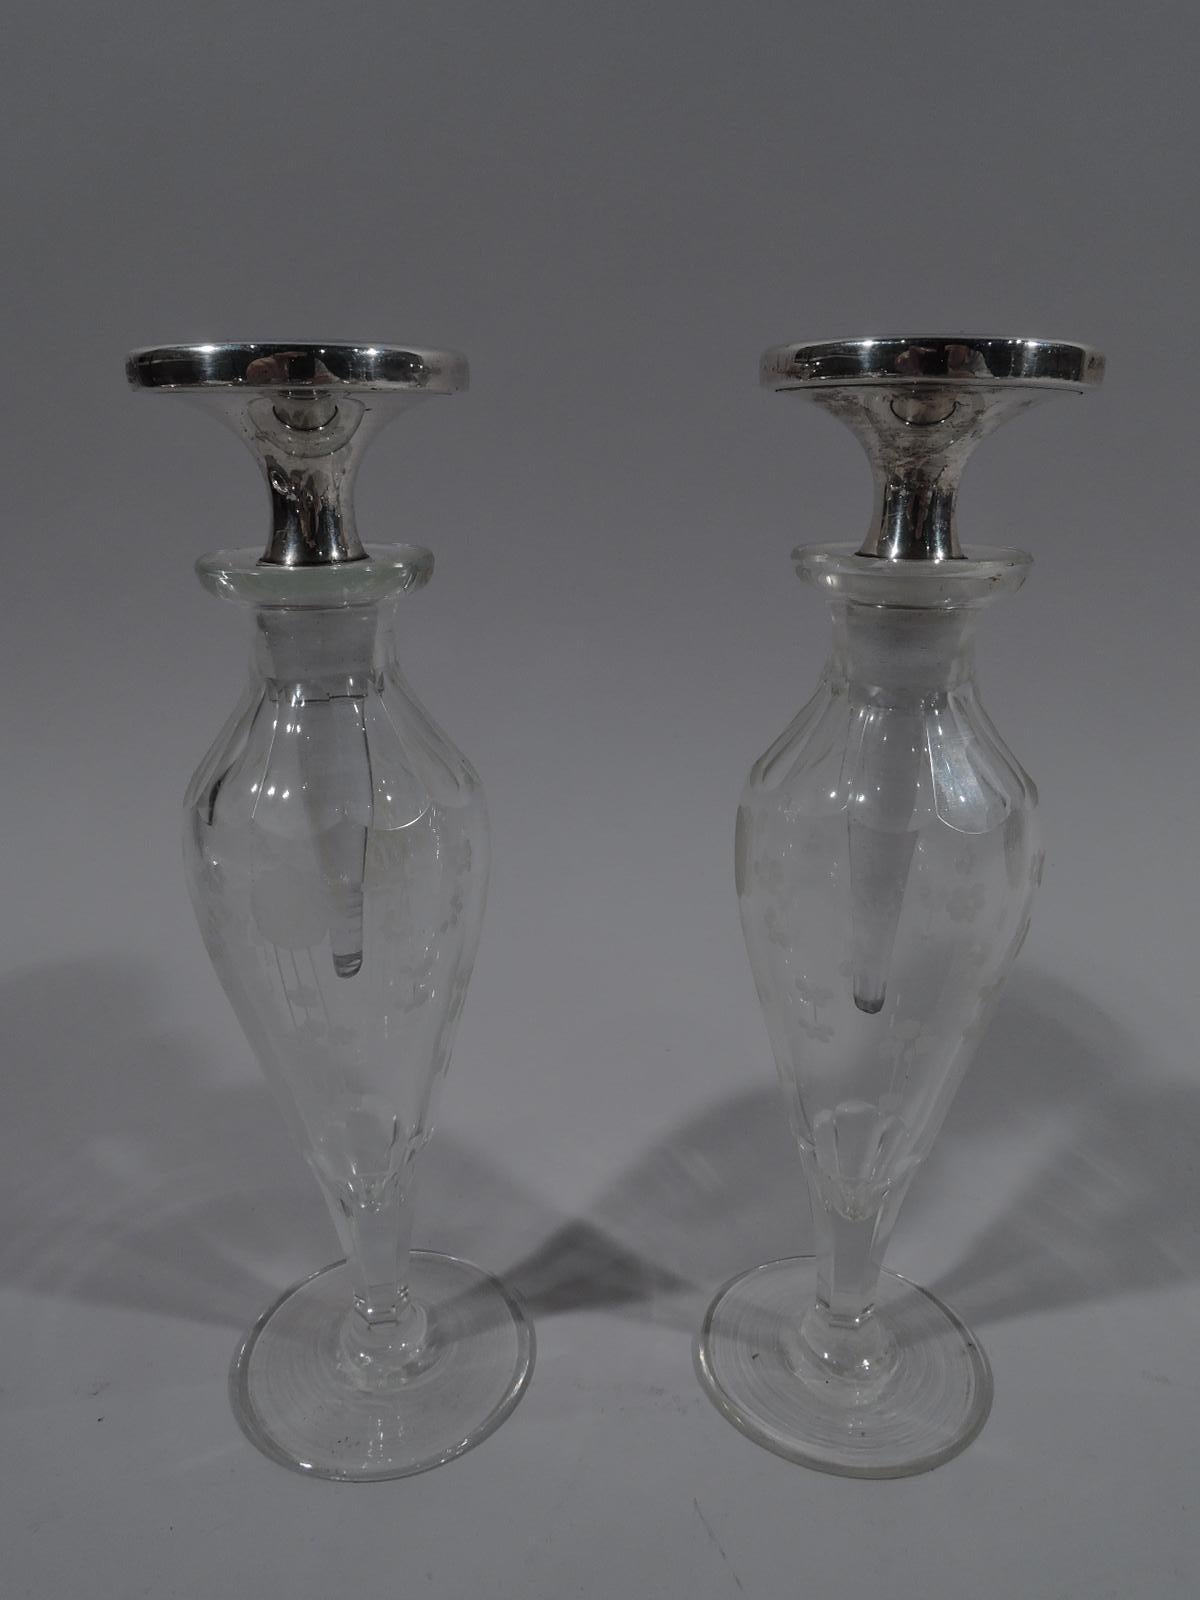 Pair of Art Deco, sterling silver, enamel, and crystal perfumes. Retailed by Cartier in New York, ca 1920. Each: Crystal baluster bottle with flat circular foot, cut lobed shoulder, and short neck. Etched stylized flowers. Disc stopper with